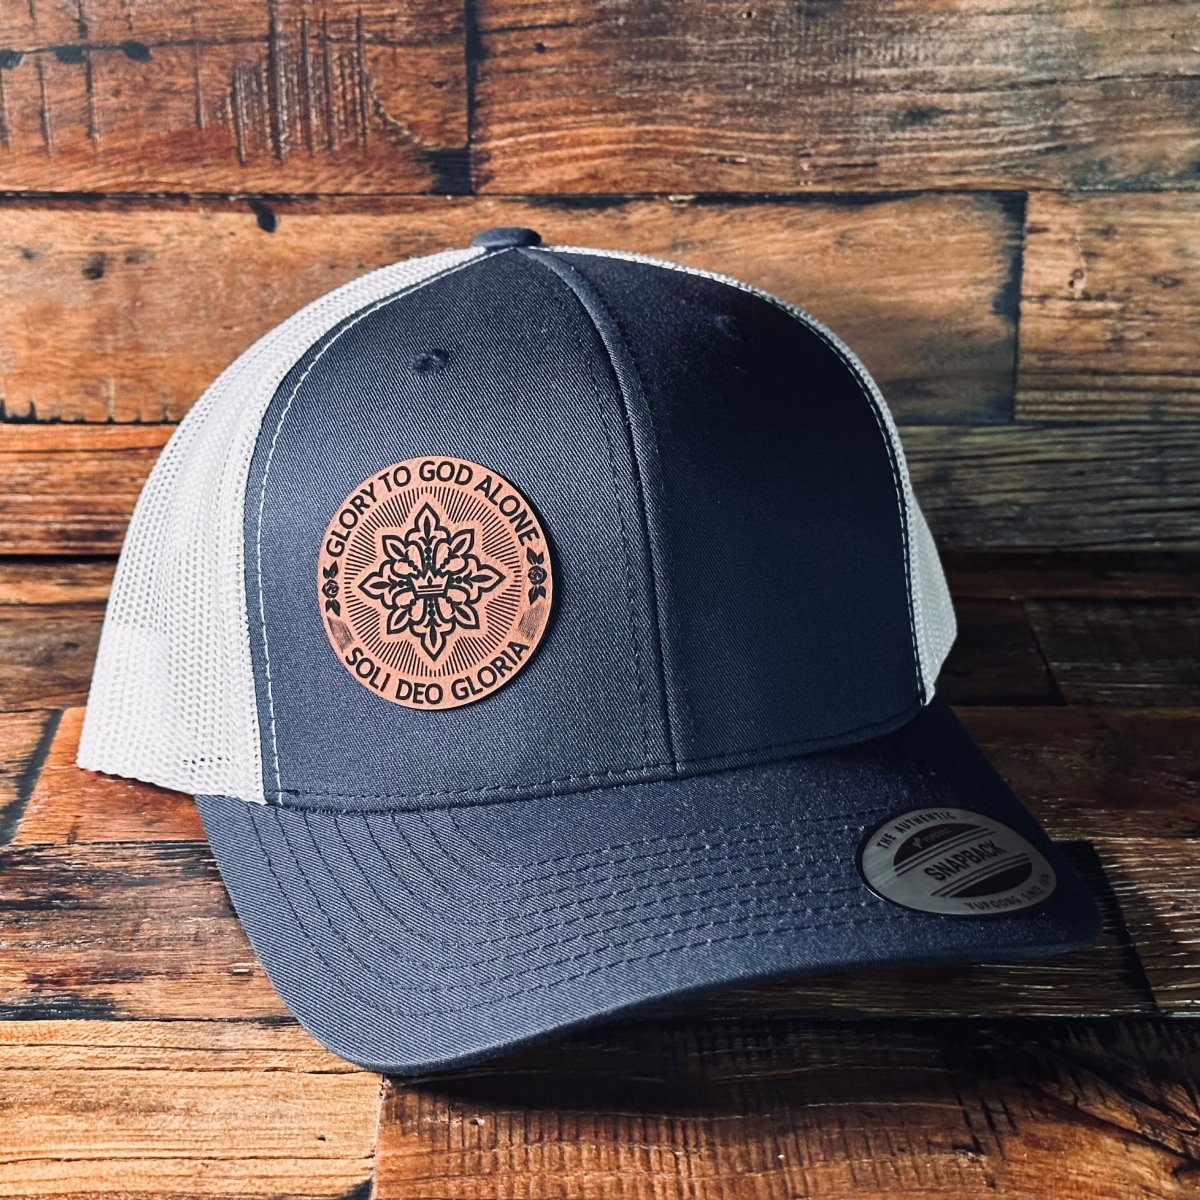 Hat - Soli Deo Gloria Seal - Patch Hat - The Reformed Sage - #reformed# - #reformed_gifts# - #christian_gifts#